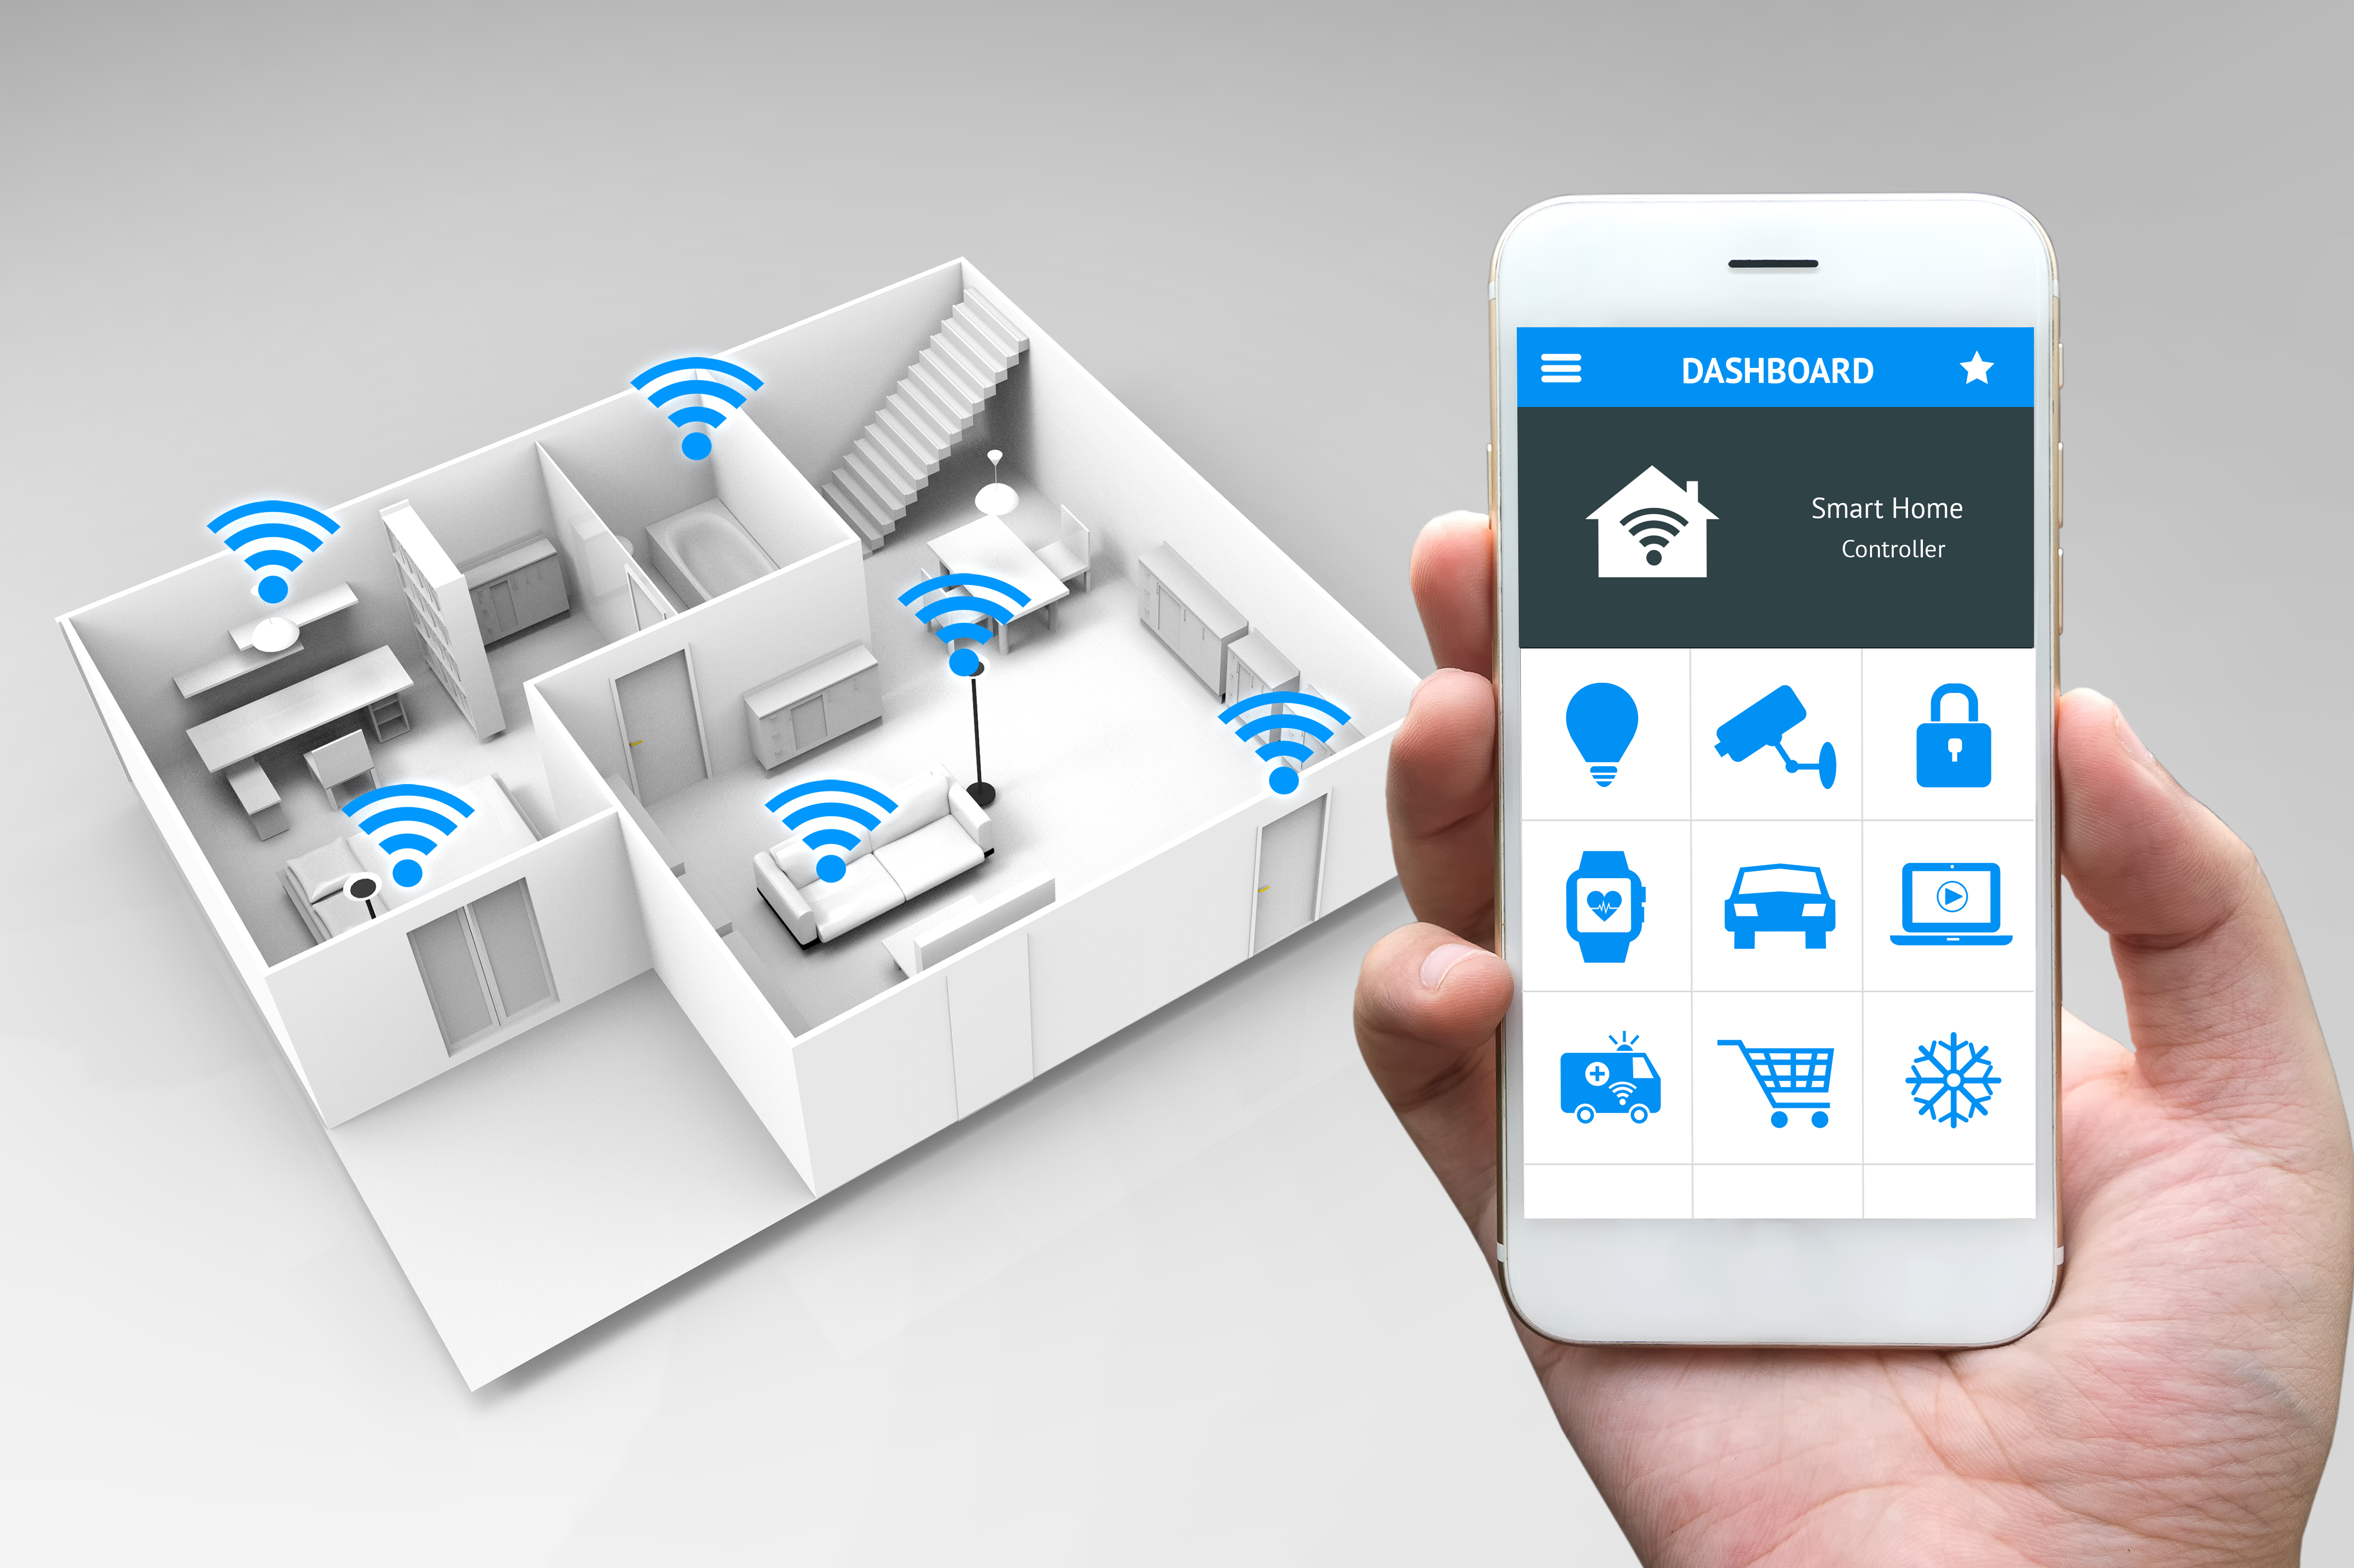 Devices on your smart home 